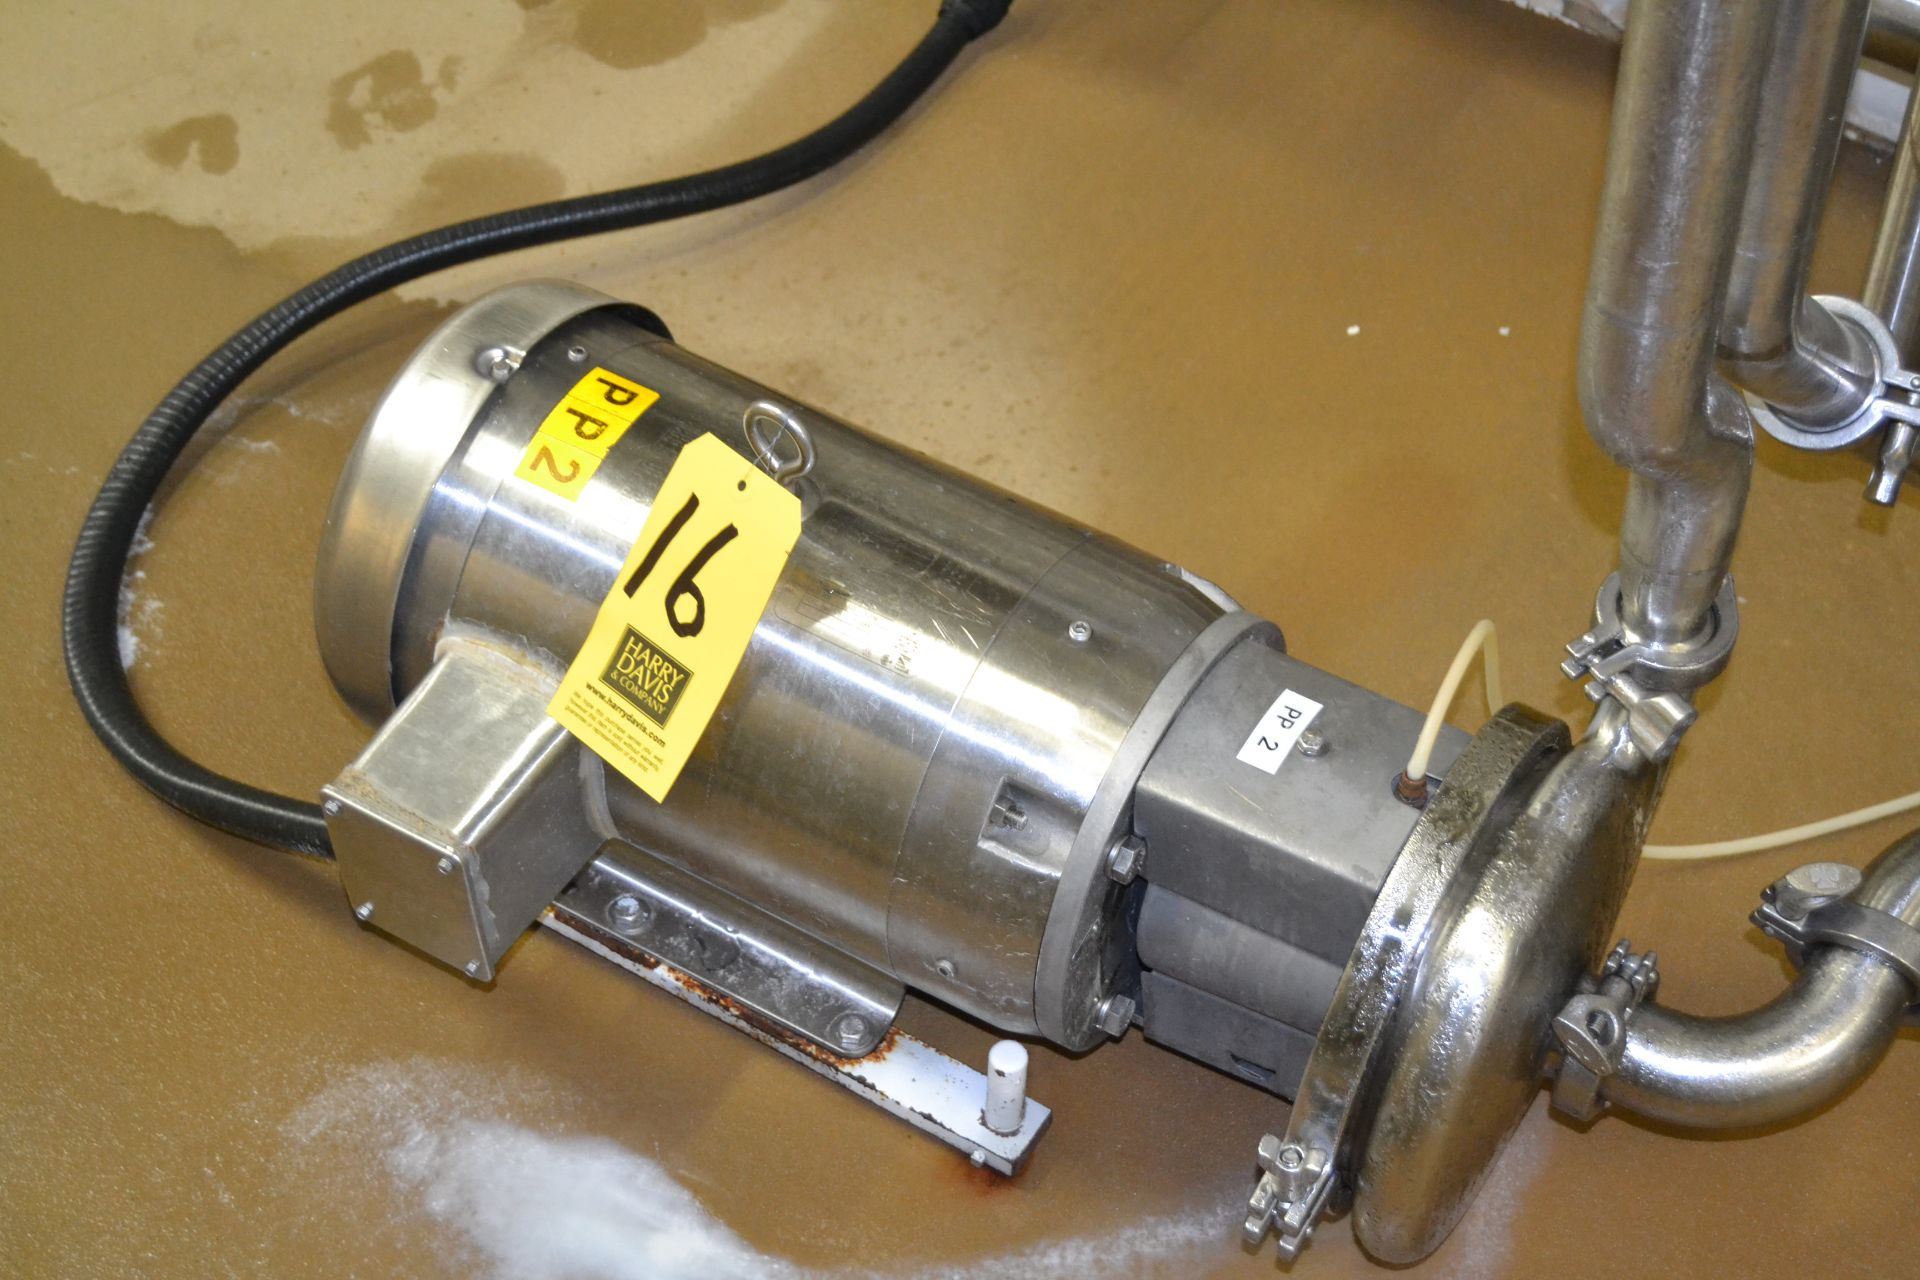 Tri Clover 7.5 hp S/S Clad Pump with Baldor Super E 1770 RPM Motor and 2" x 1.5" S/S Head, Clamp